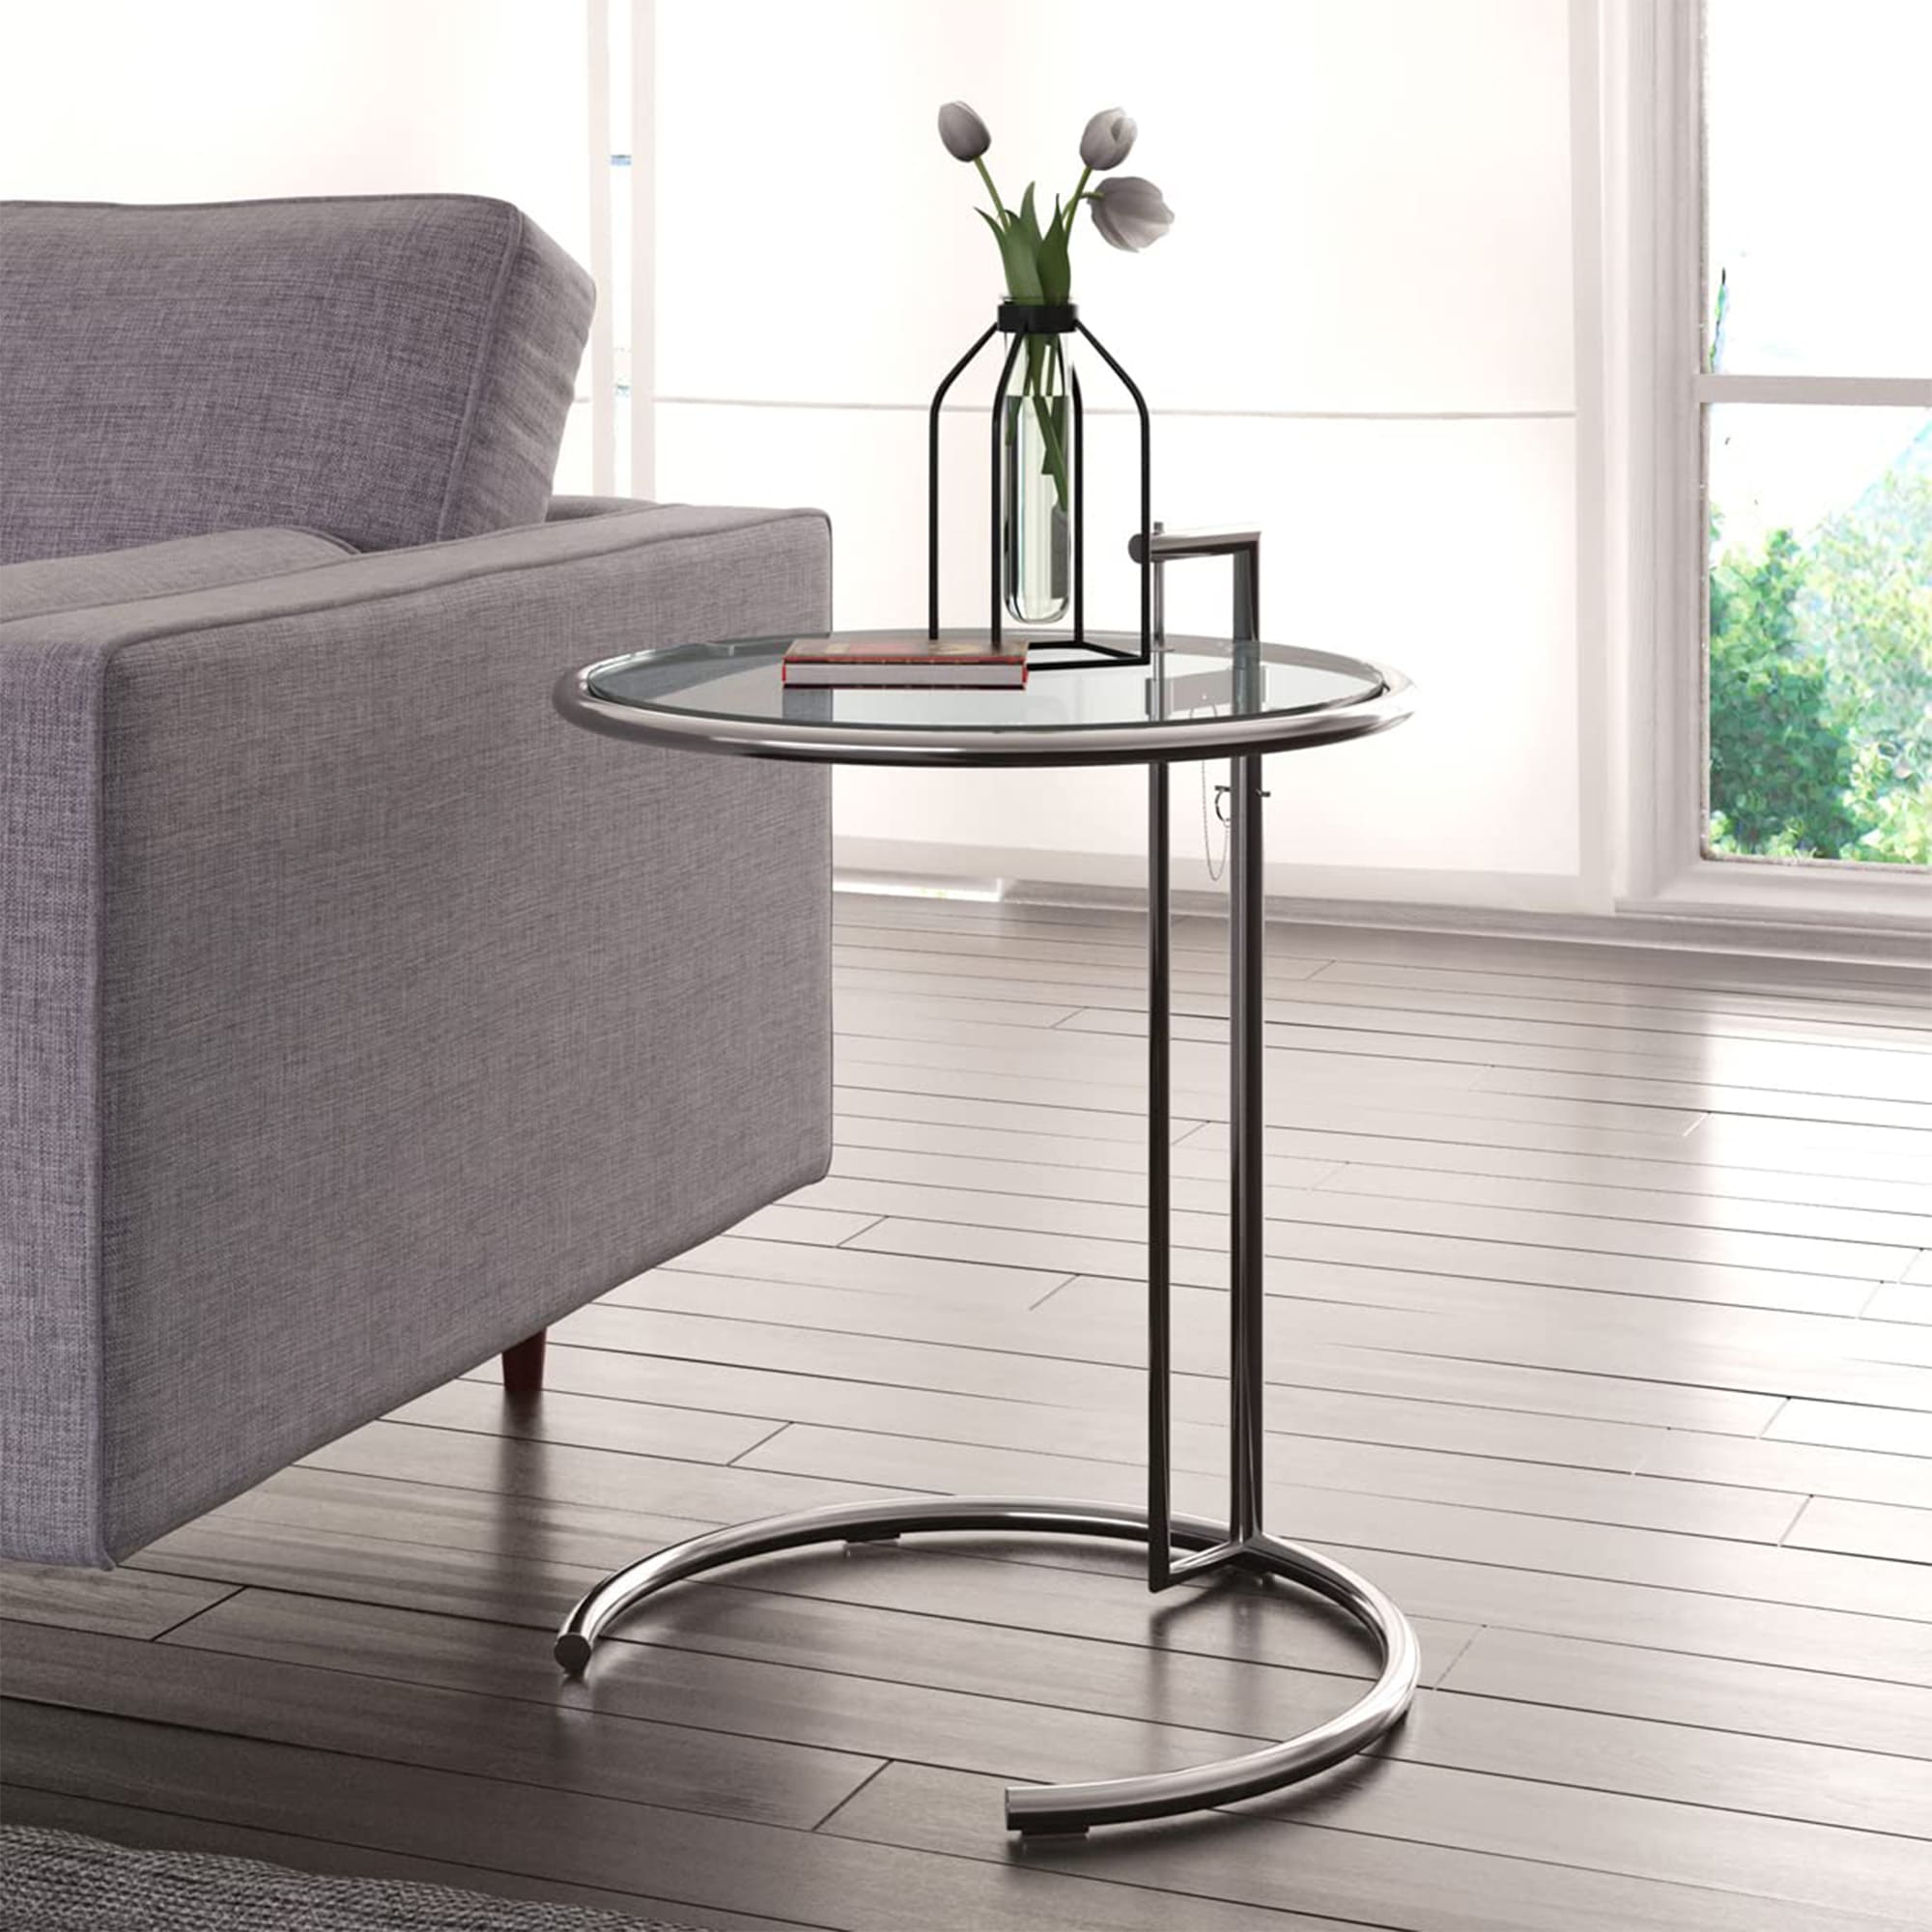 A modern and stylish E1027 Side Table Replica with high-quality stainless steel construction, featuring an adjustable, tiltable top.